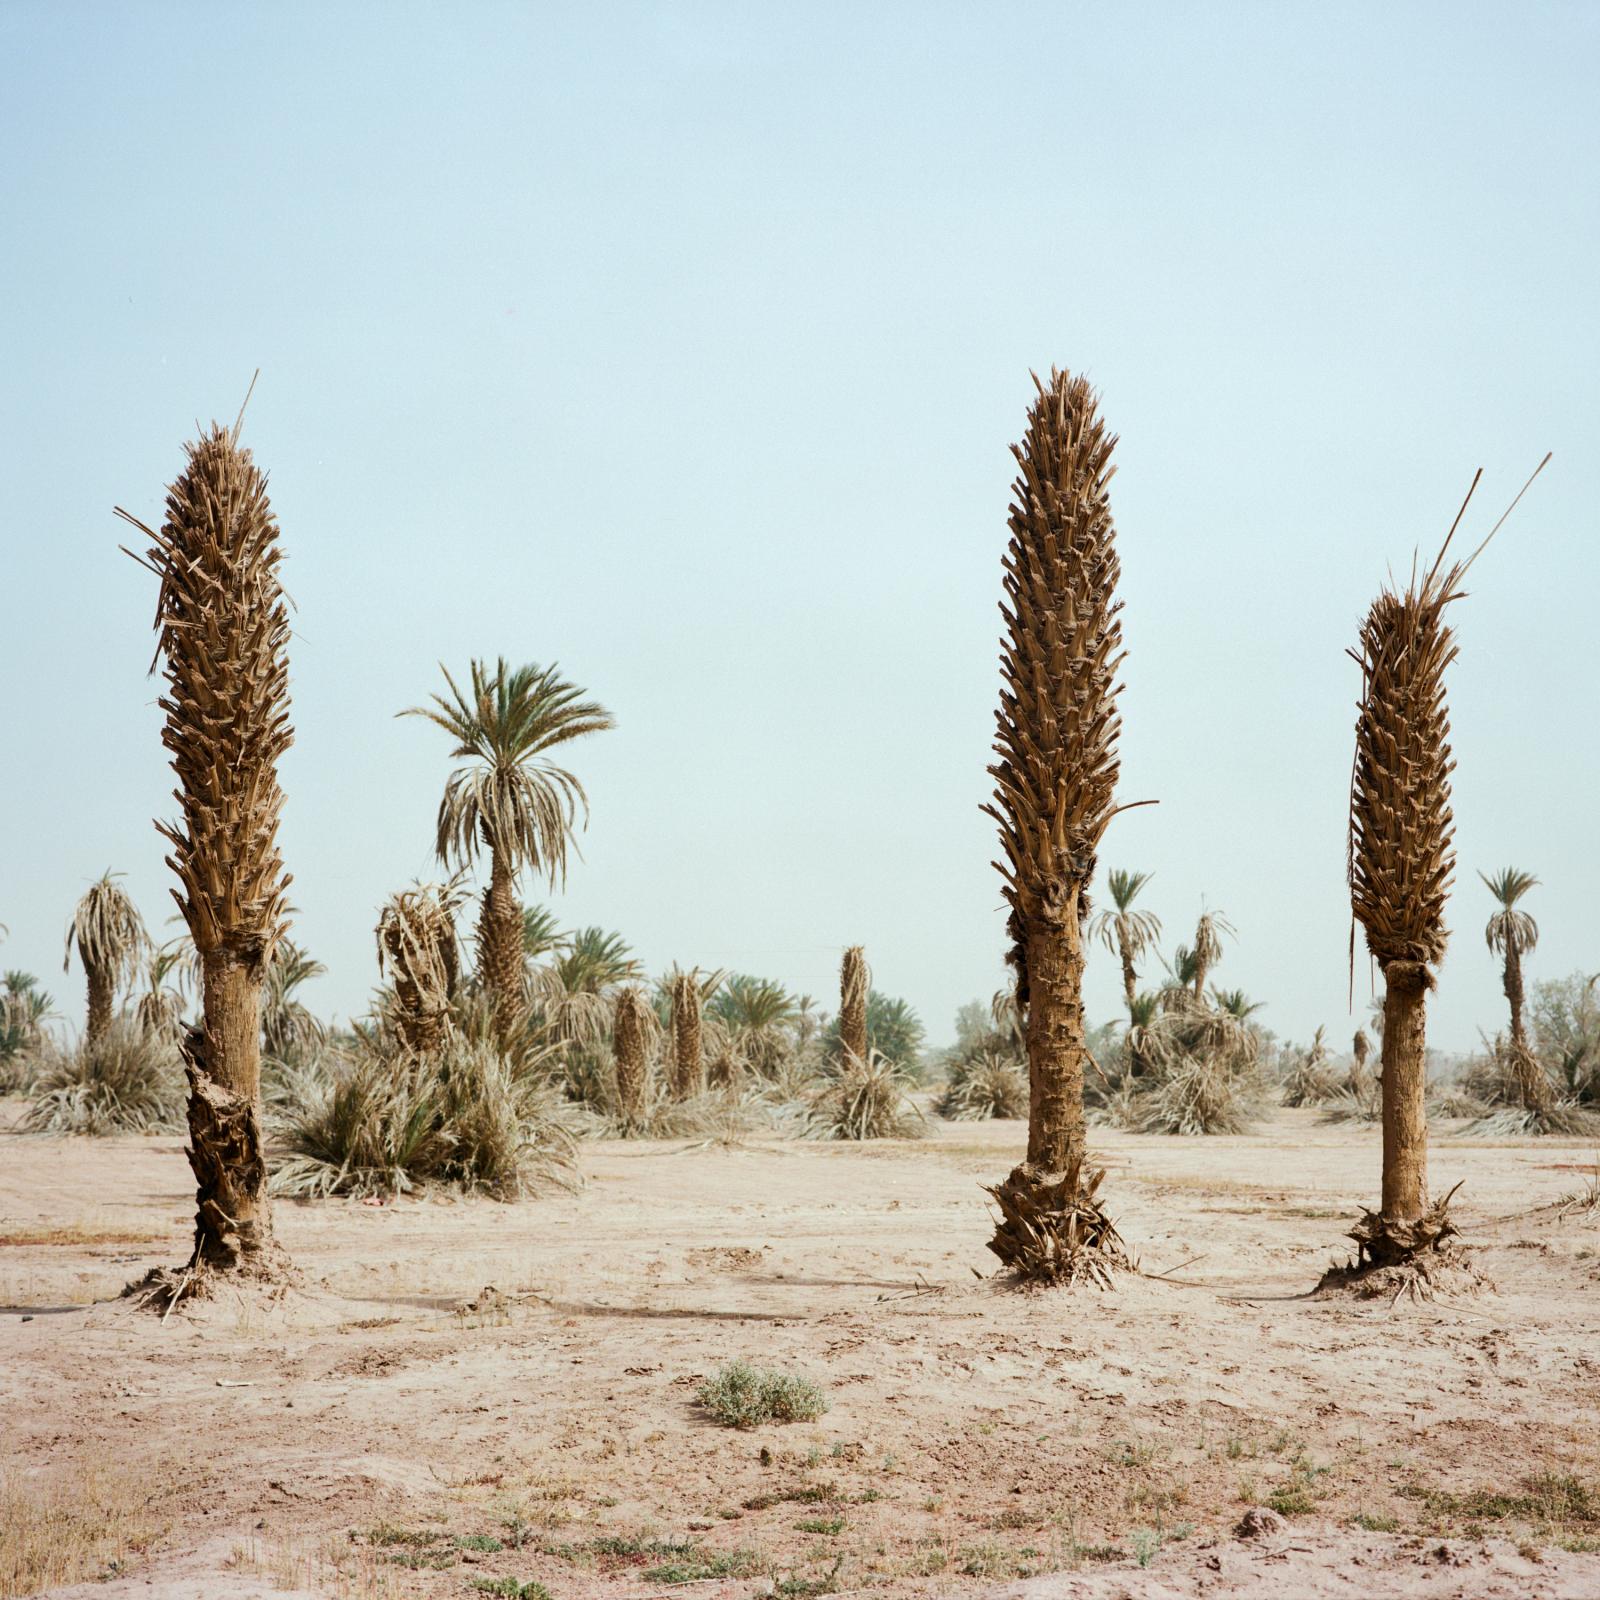 Before it's gone - ongoing - Dead palm trees at the edge of the oasis of M'hamid...